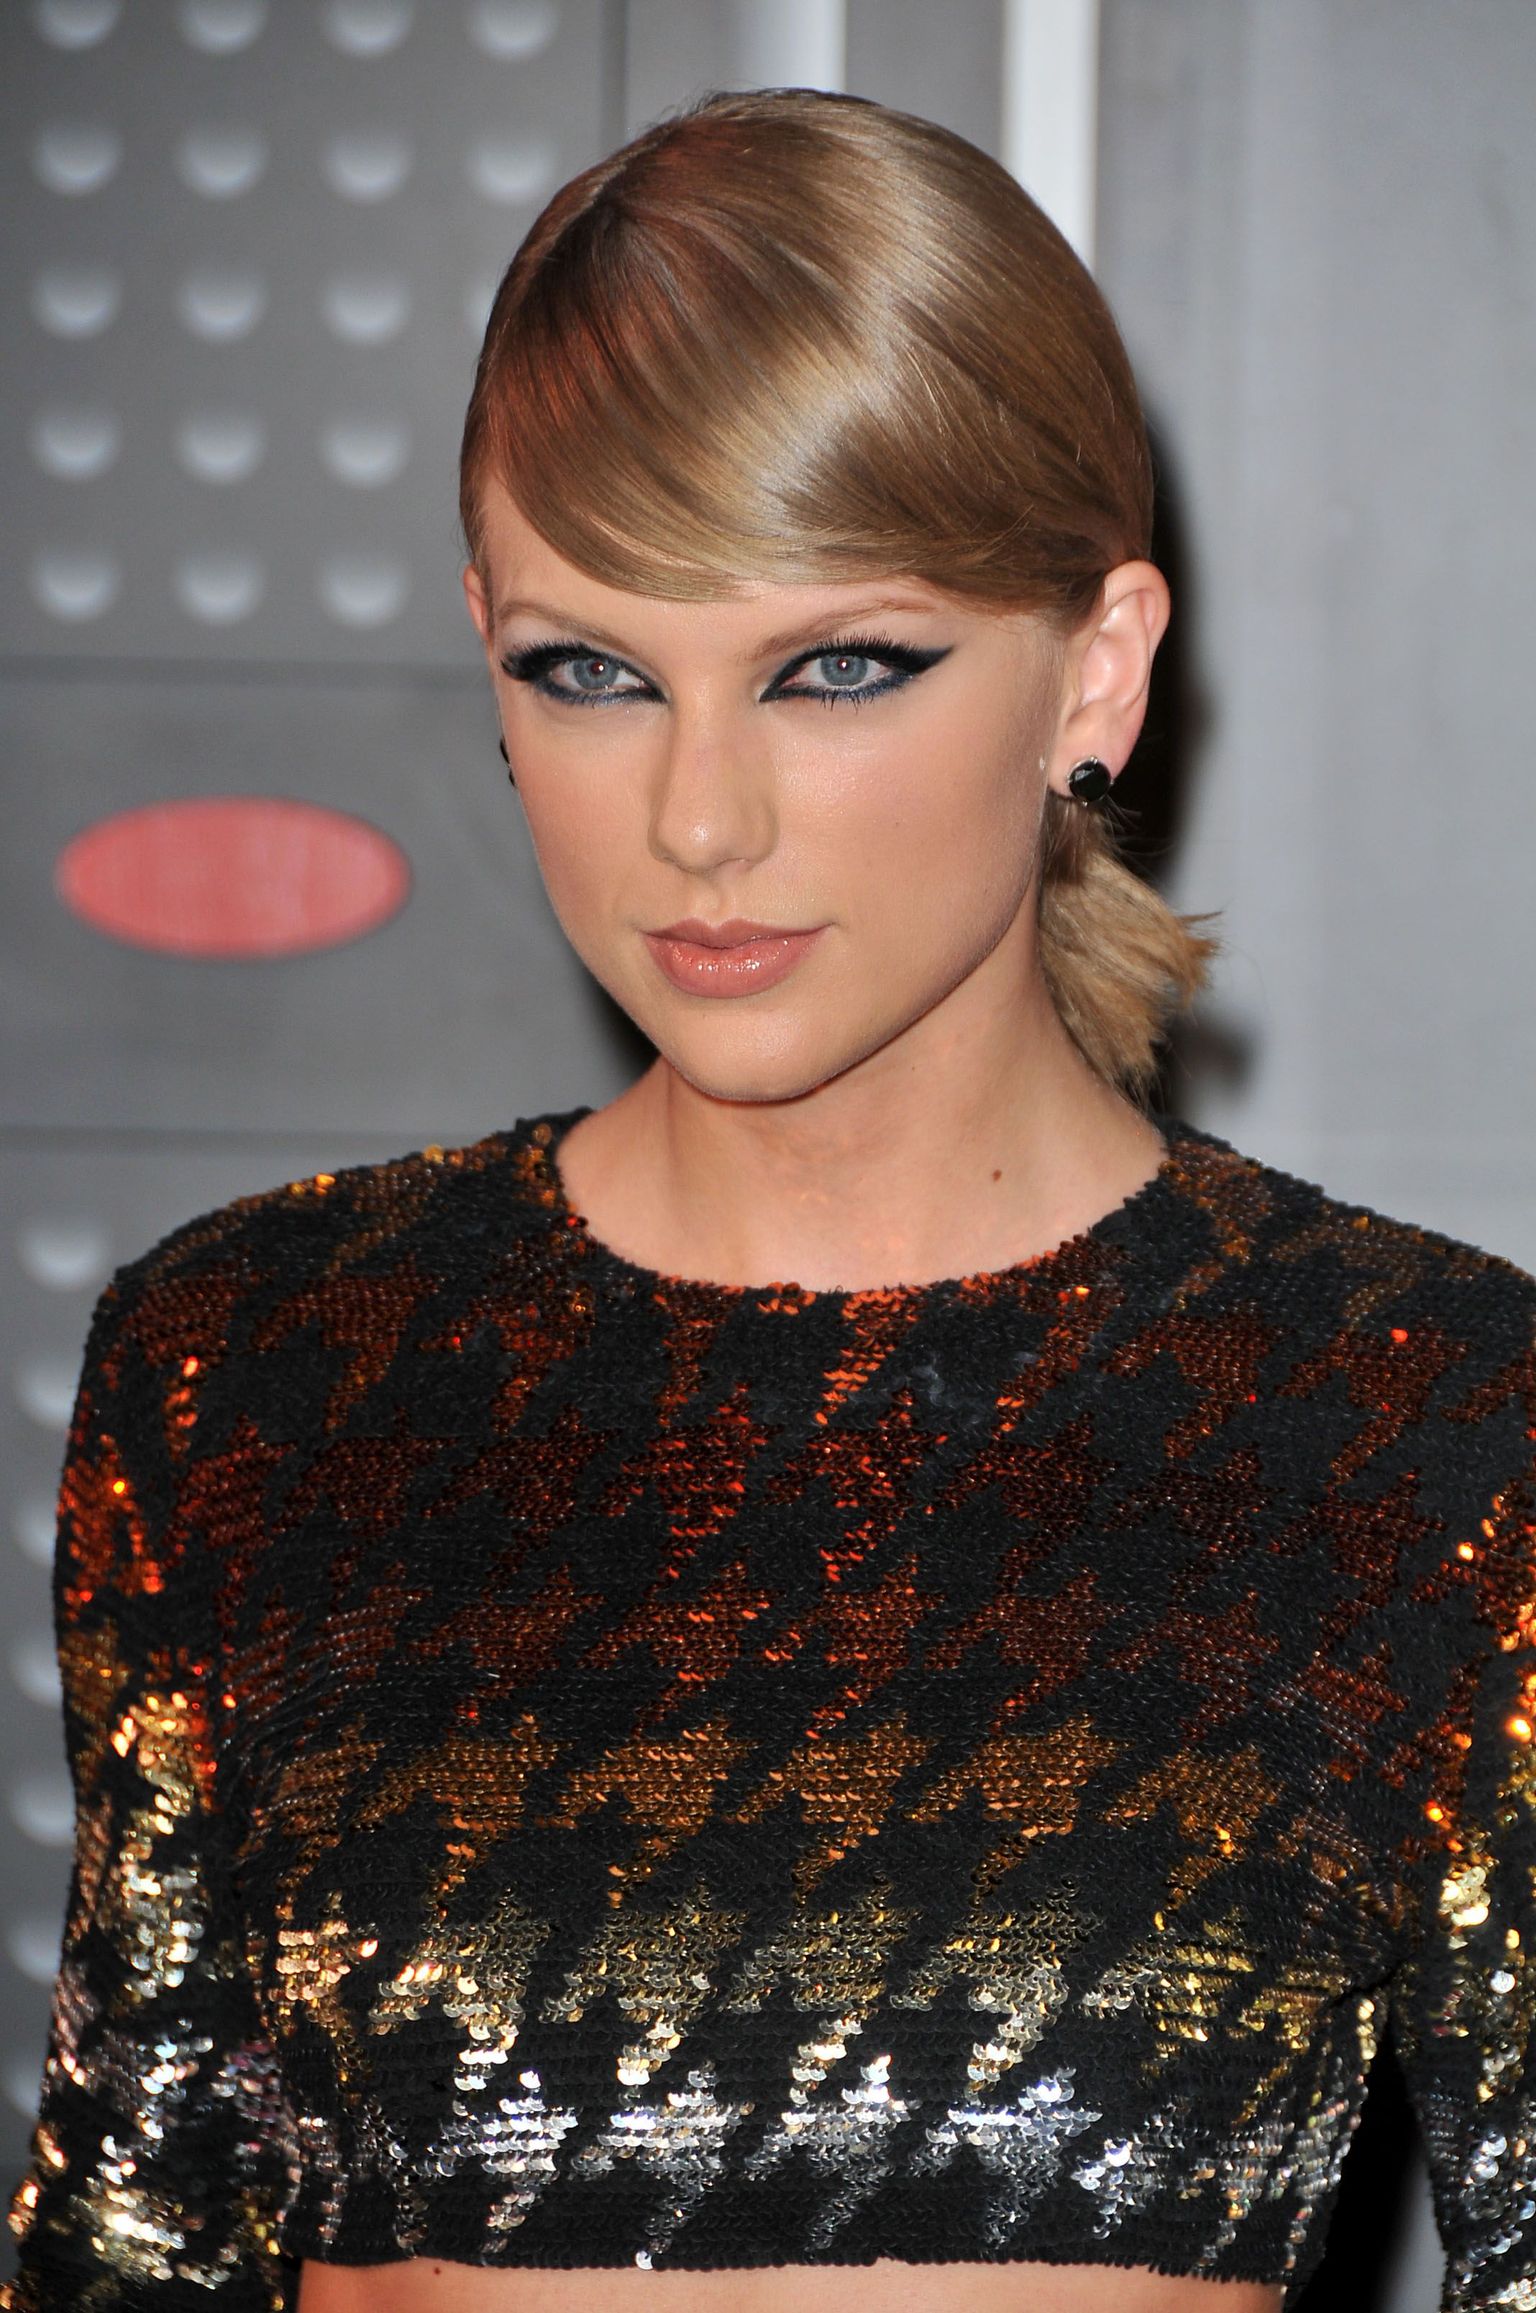 Taylor Swift arrives at the 2015 MTV Video Music Awards held at Microsoft Theater in Los Angeles, CA on August 30, 2015. Photo by: Sthanlee B. Mirador  *** Please Use Credit from Credit Field ***